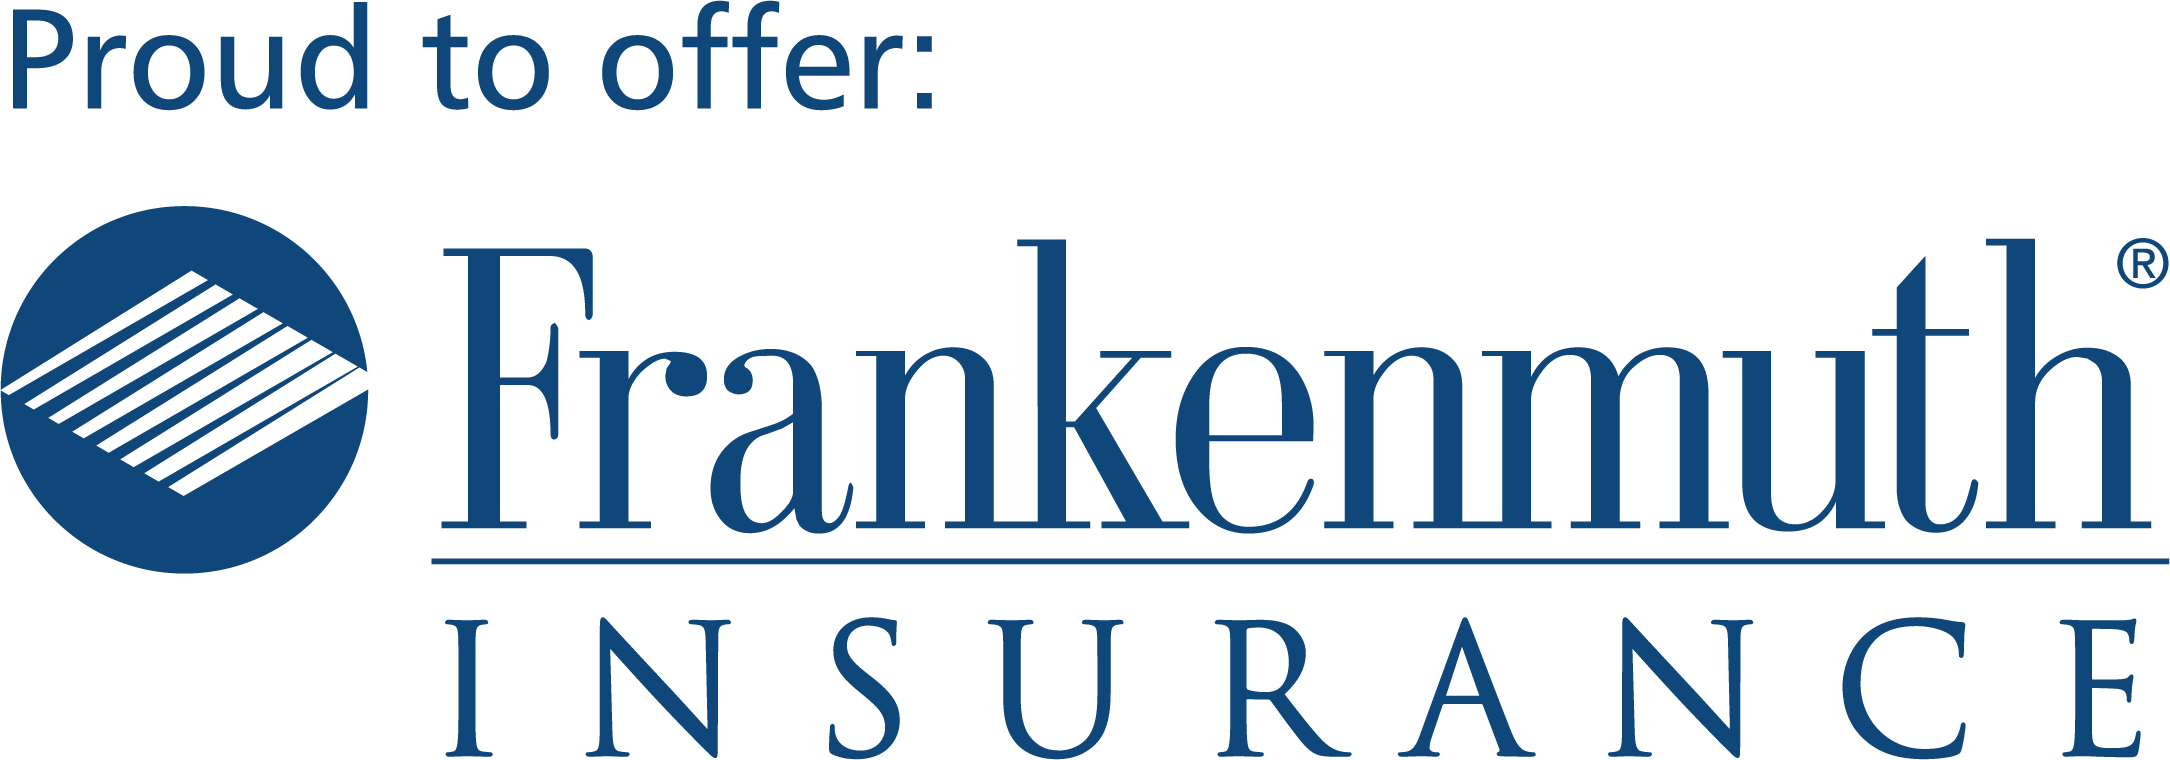 Frankenmuth Insurance_Outdoor_Proud to offers